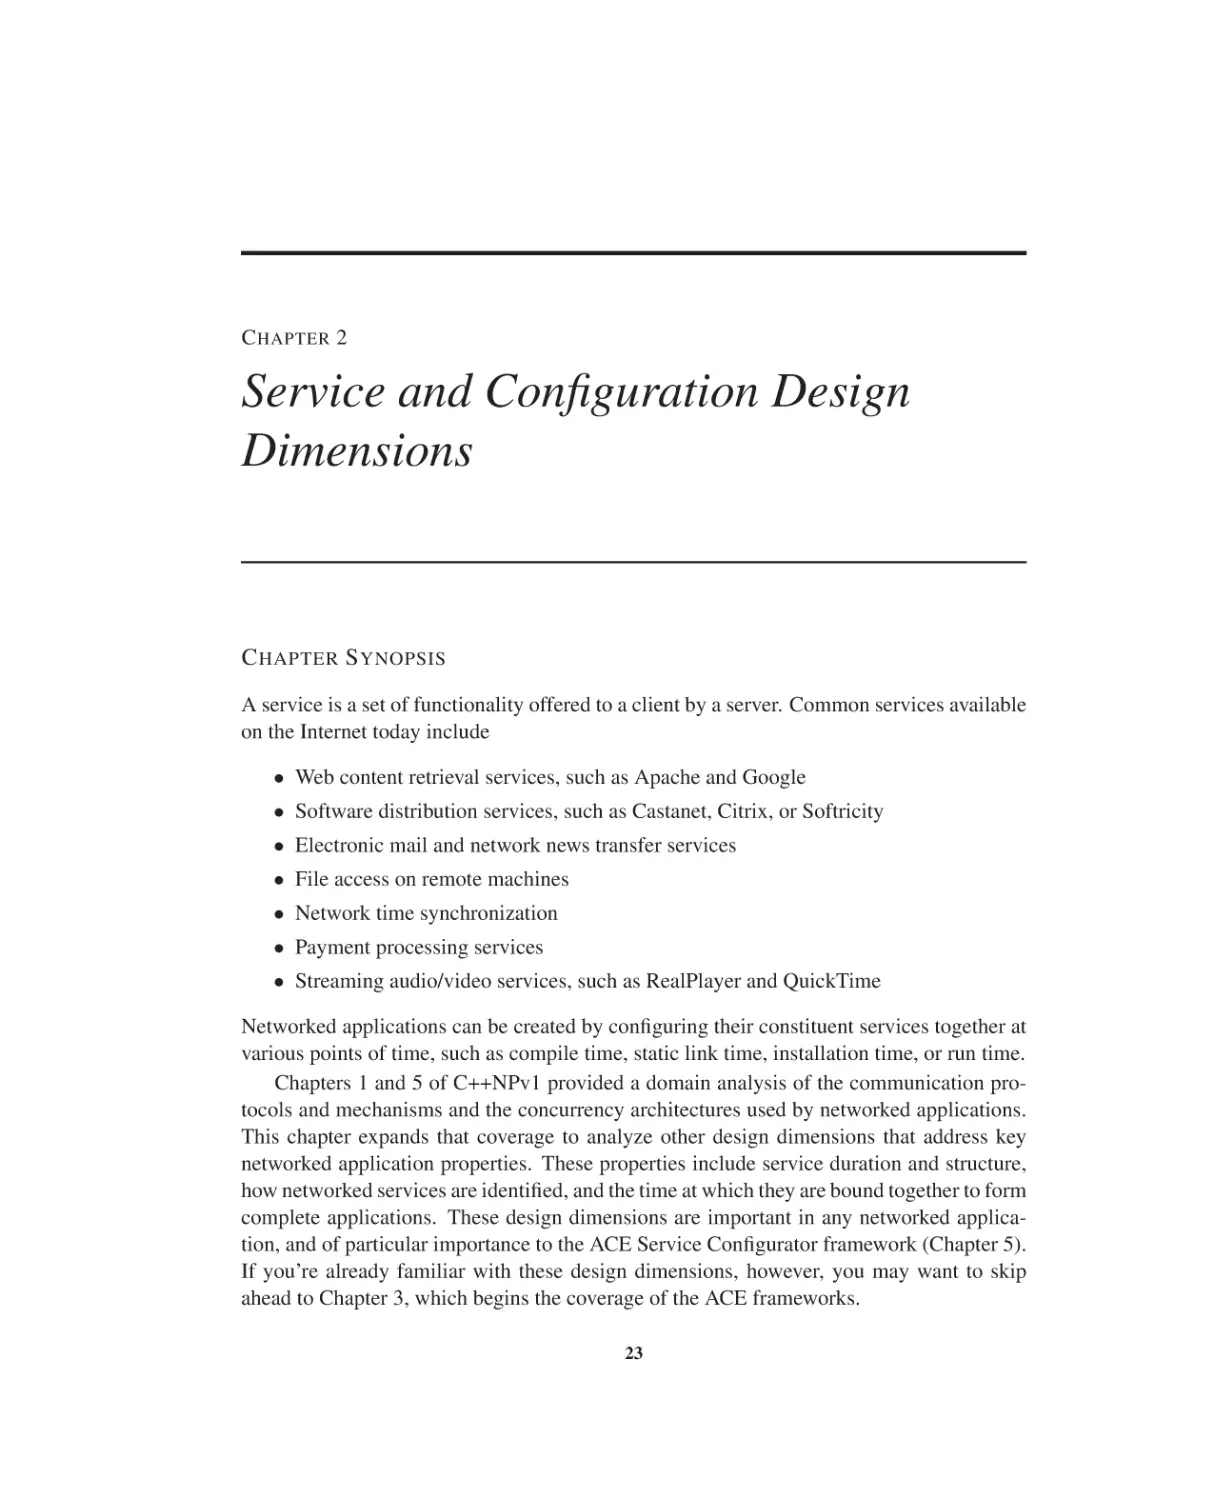 Chapter 2 Service and Configuration Design Dimensions